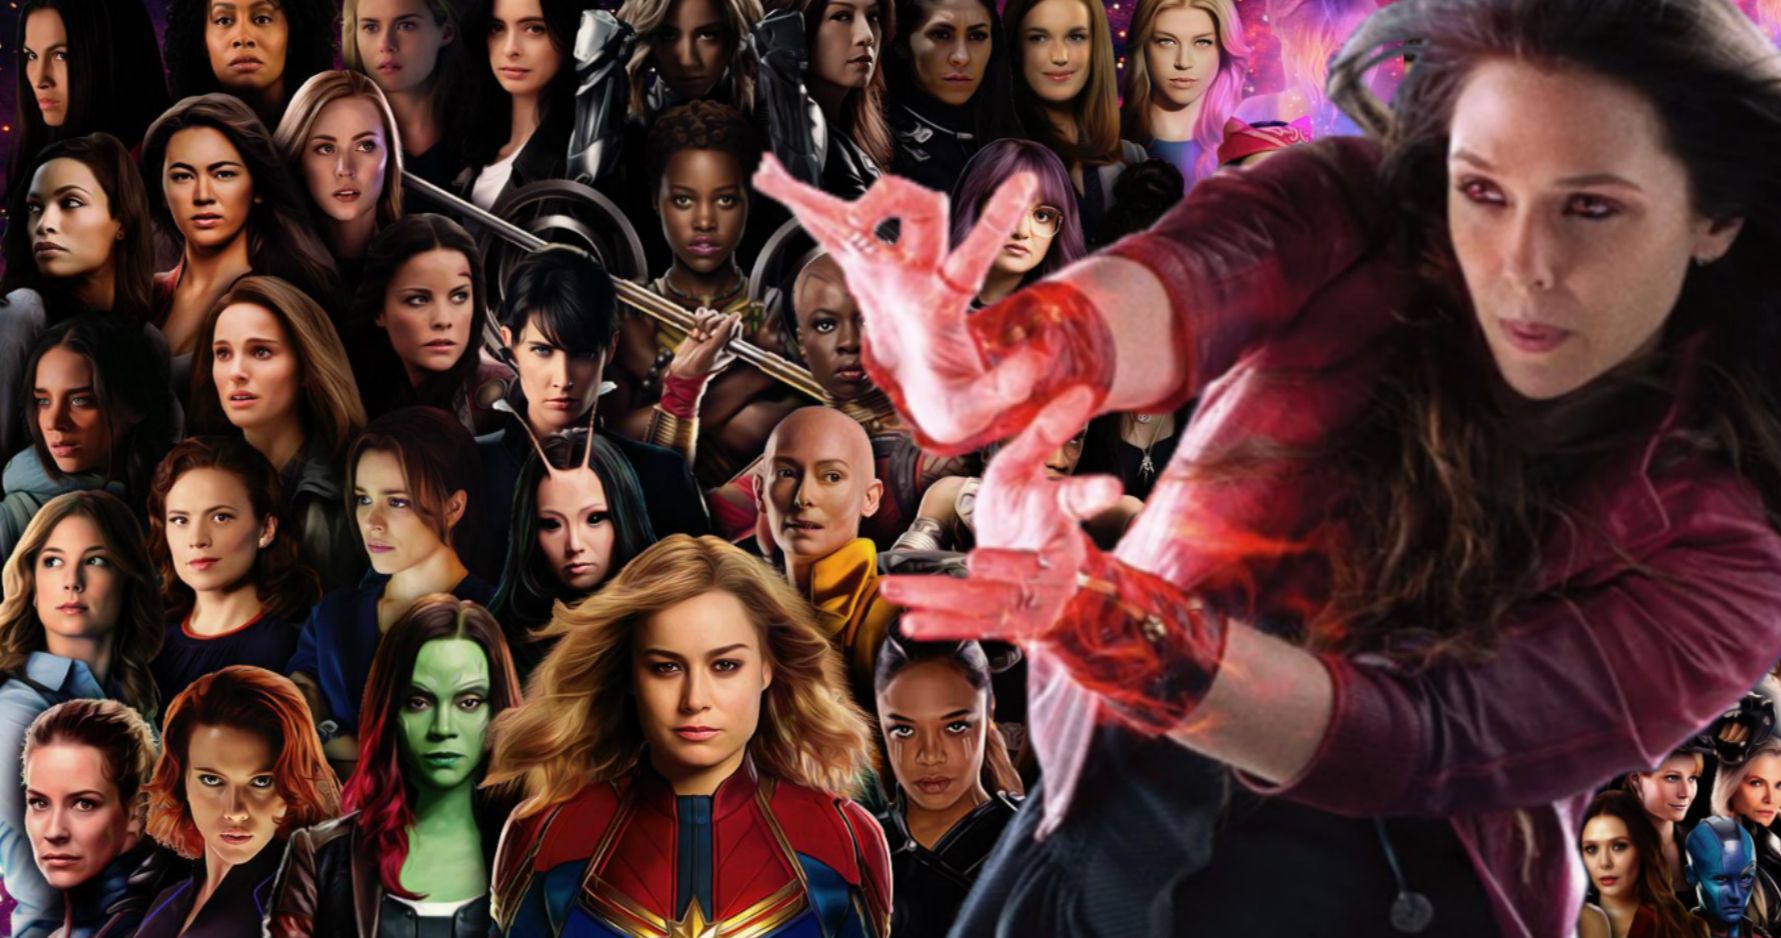 Elizabeth Olsen Thinks an All-Women MCU Movie Would Land with a Huge Impact